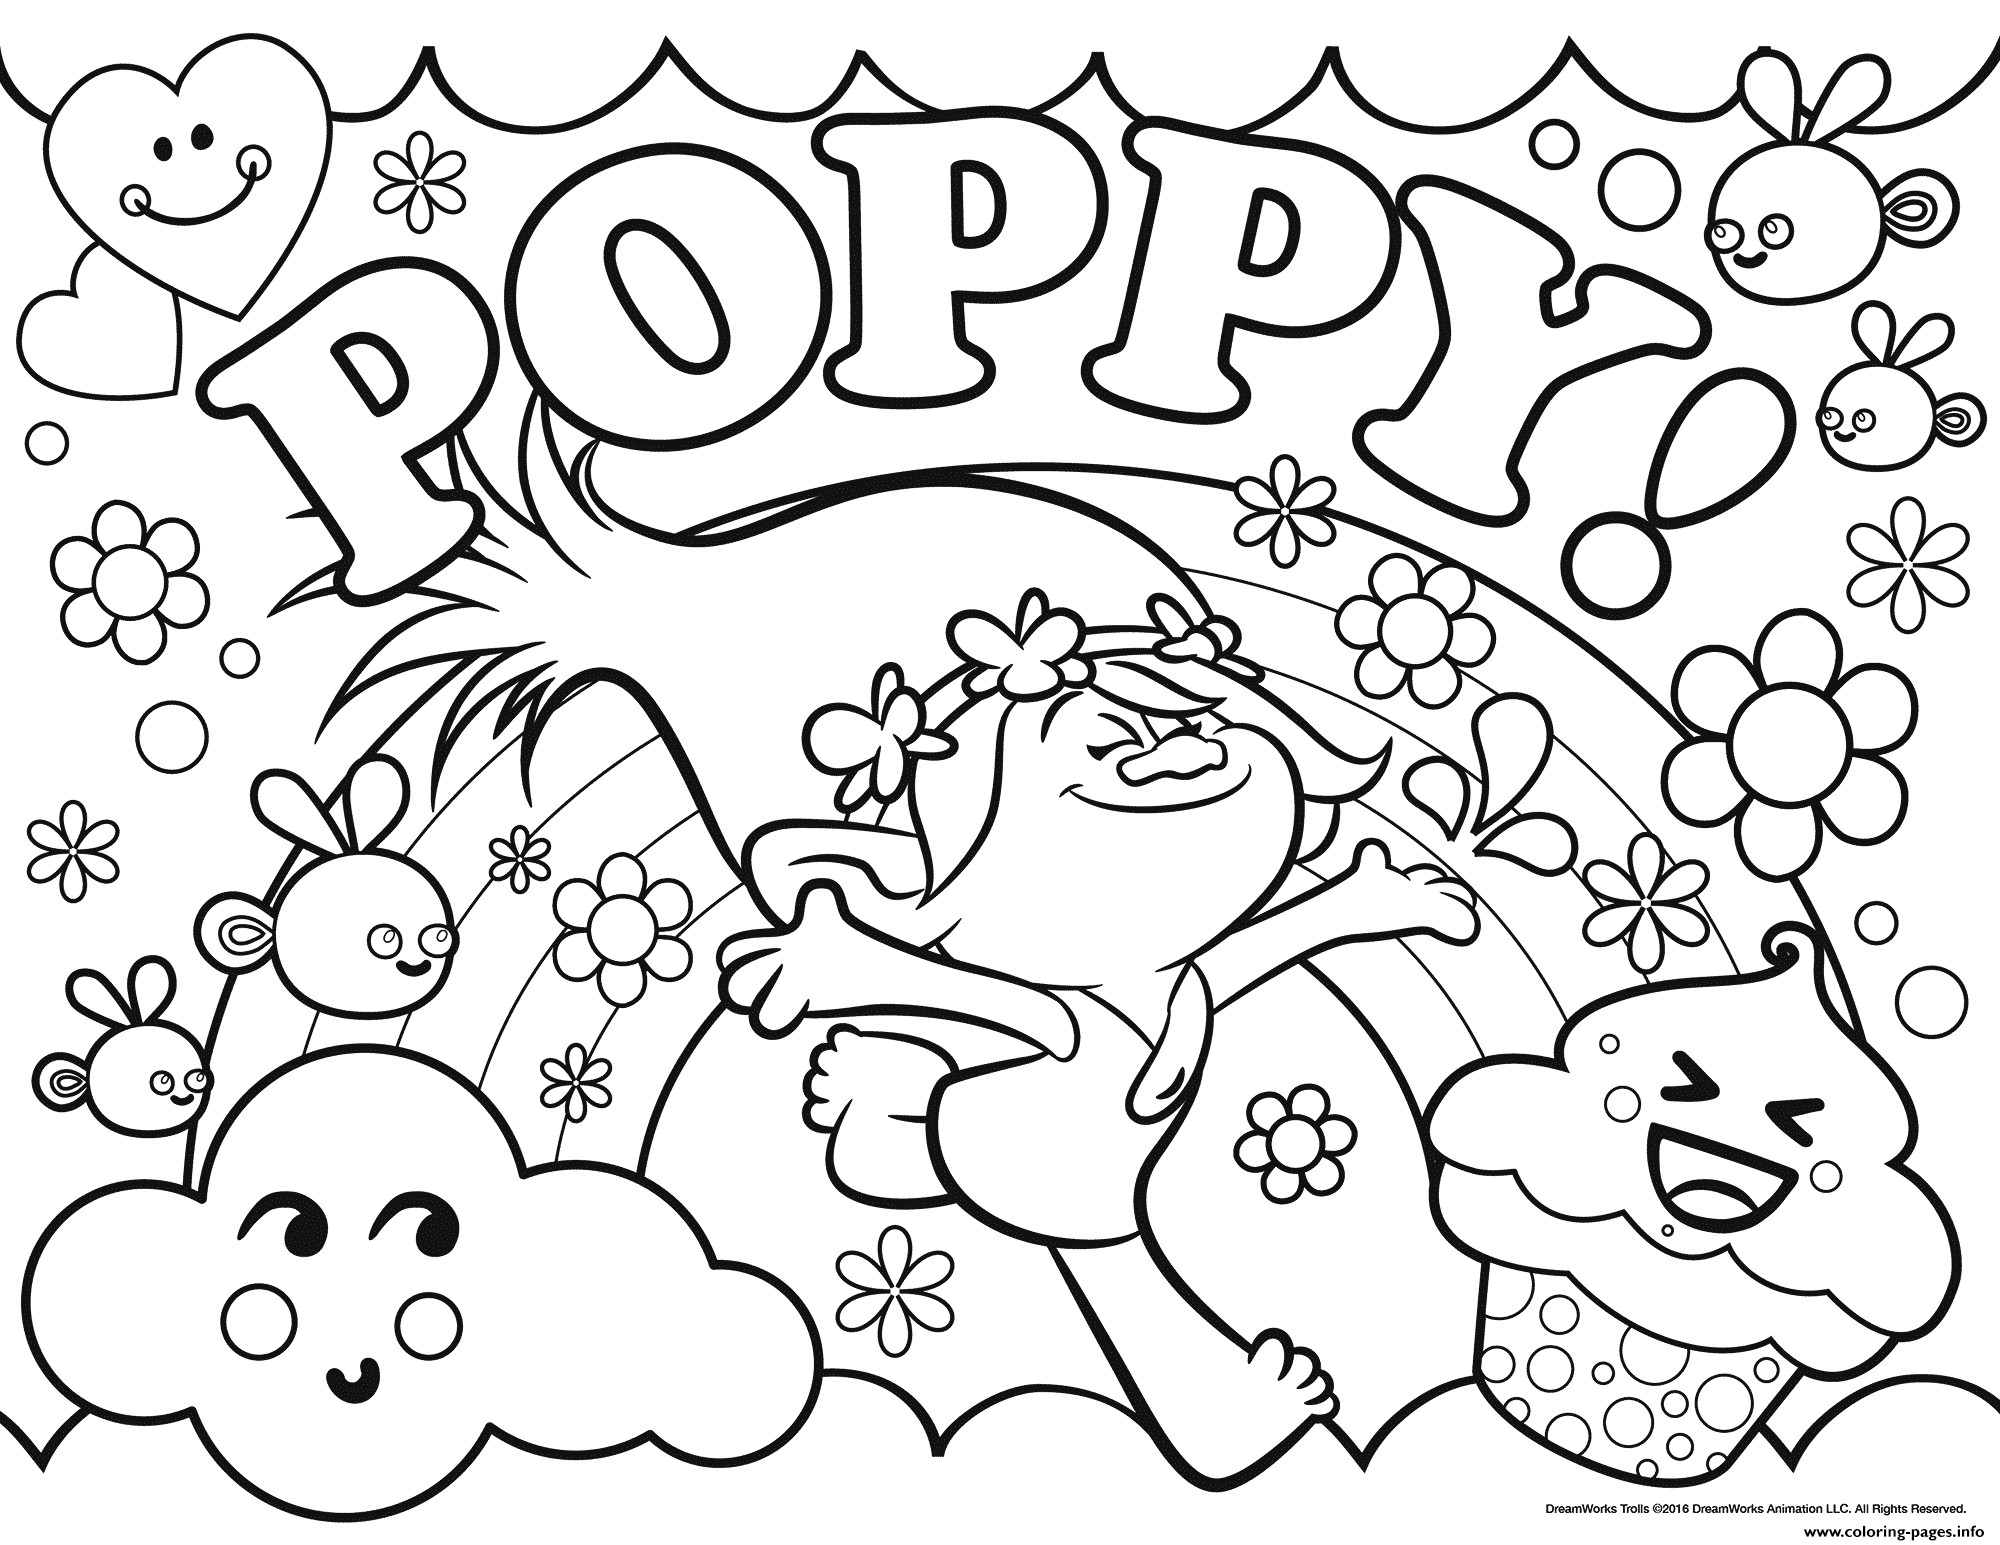 Poppy Troll Printable Coloring Pages Wallpaper